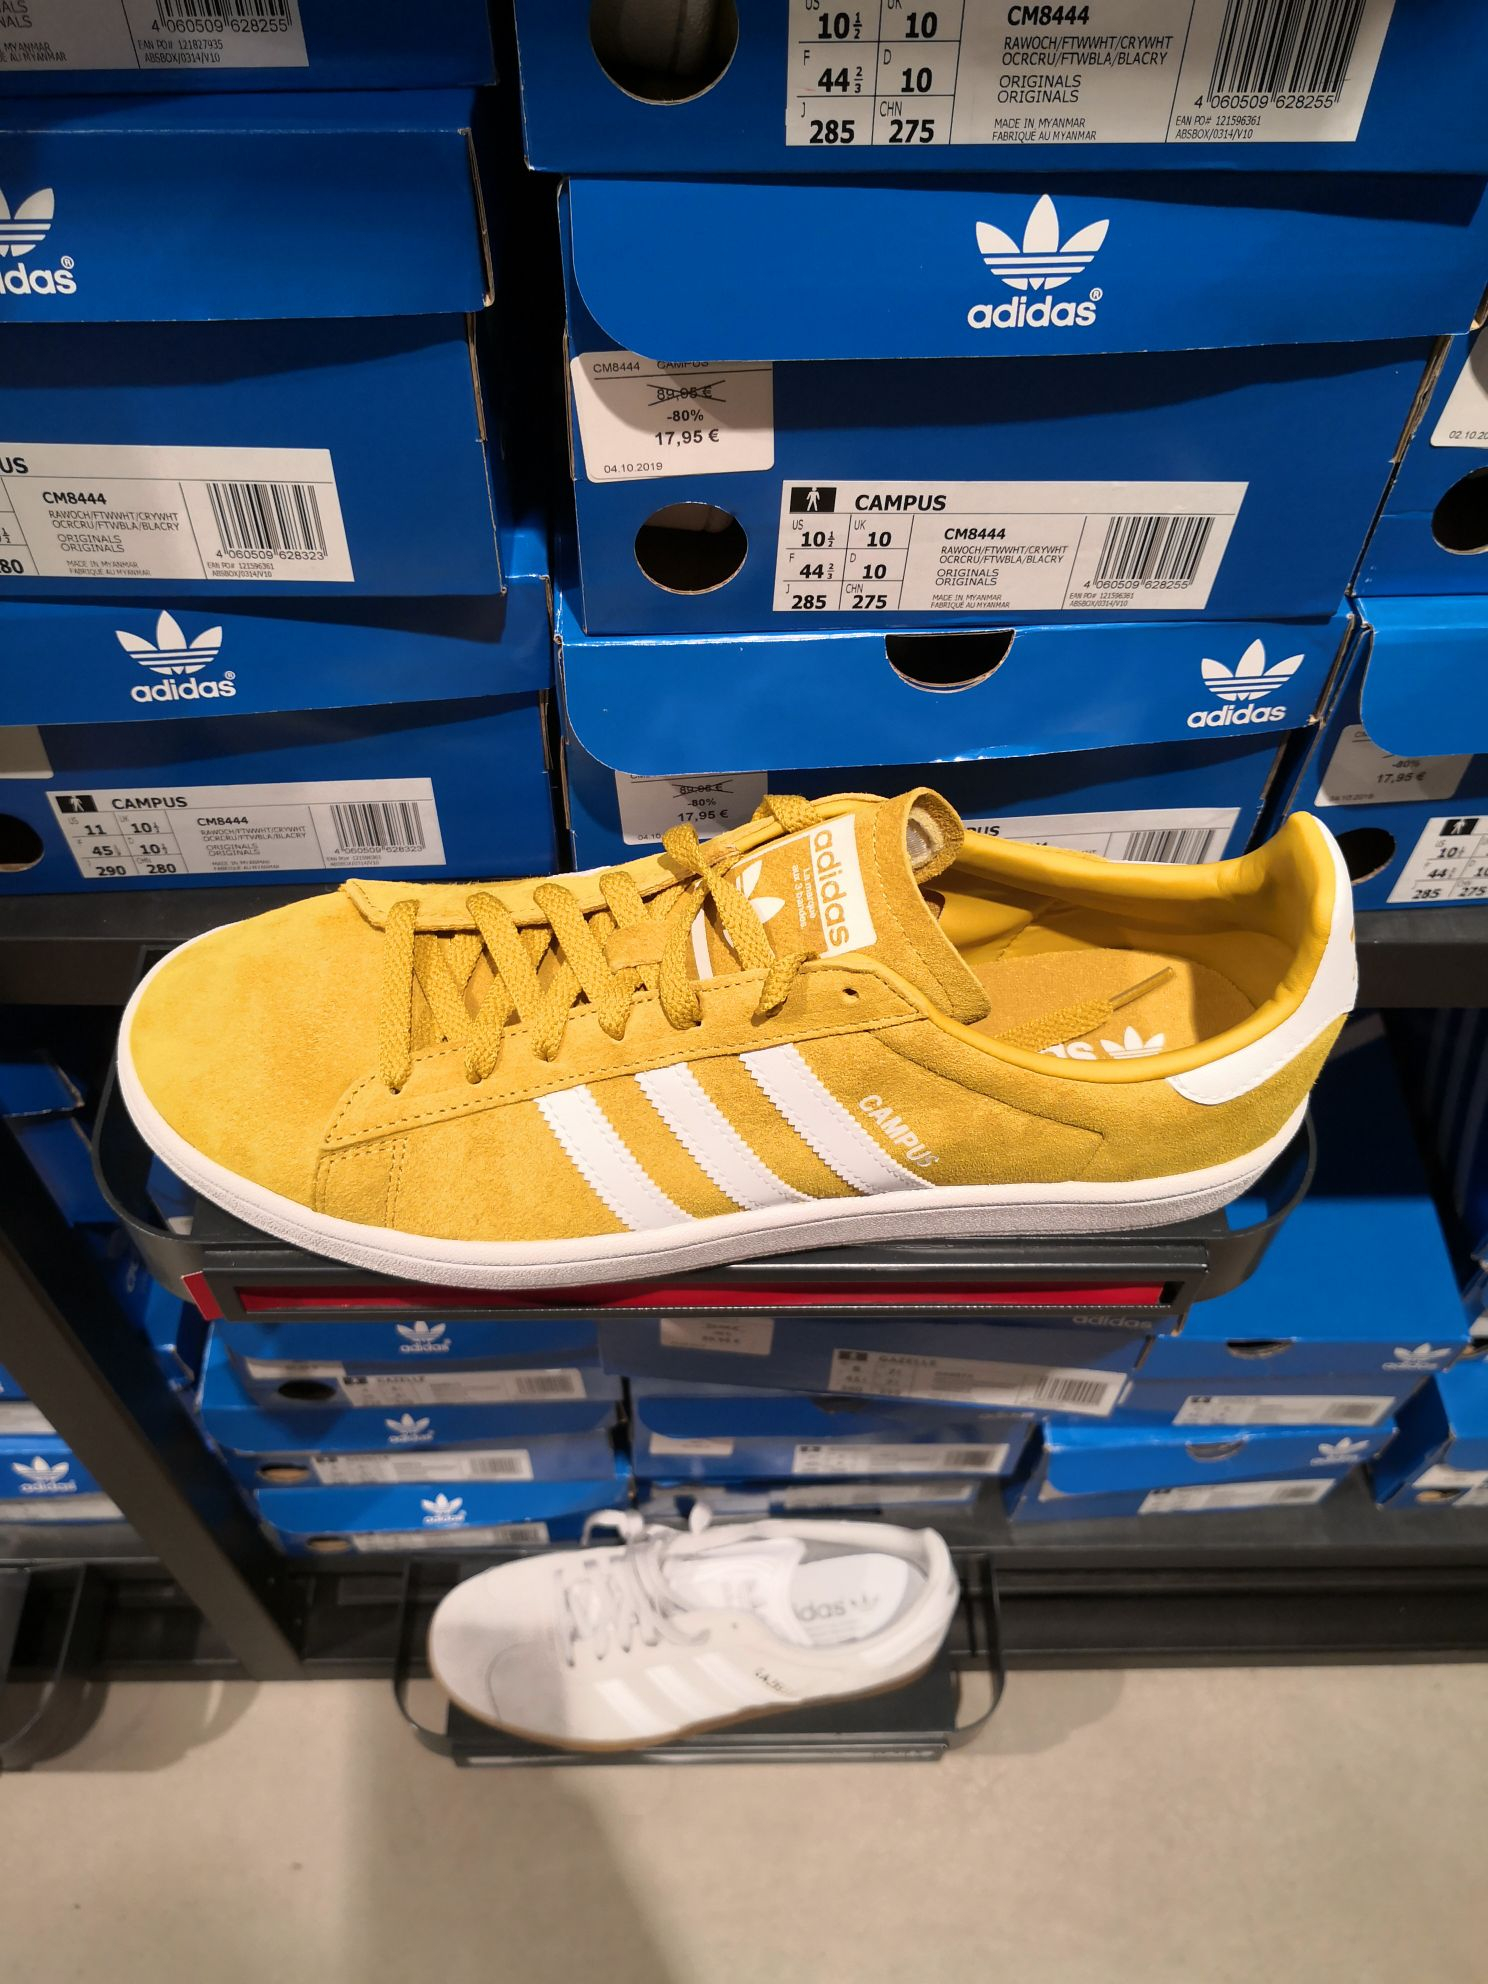 adidas outlet alcorcon